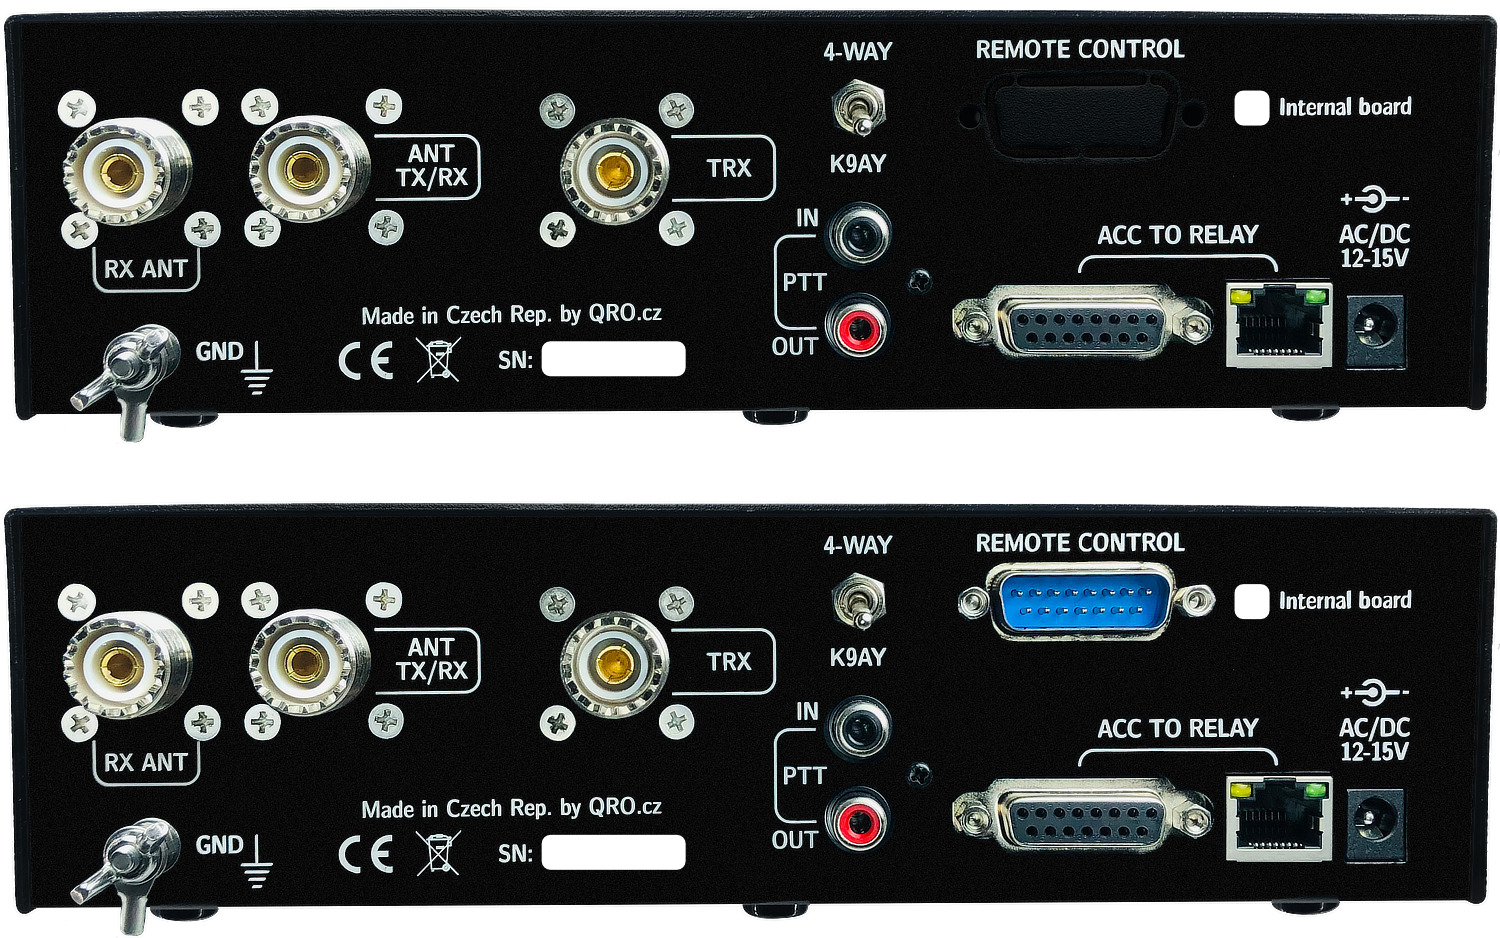 k9ay/4-way controller classic and remote version comparison by qro.cz hamparts.shop